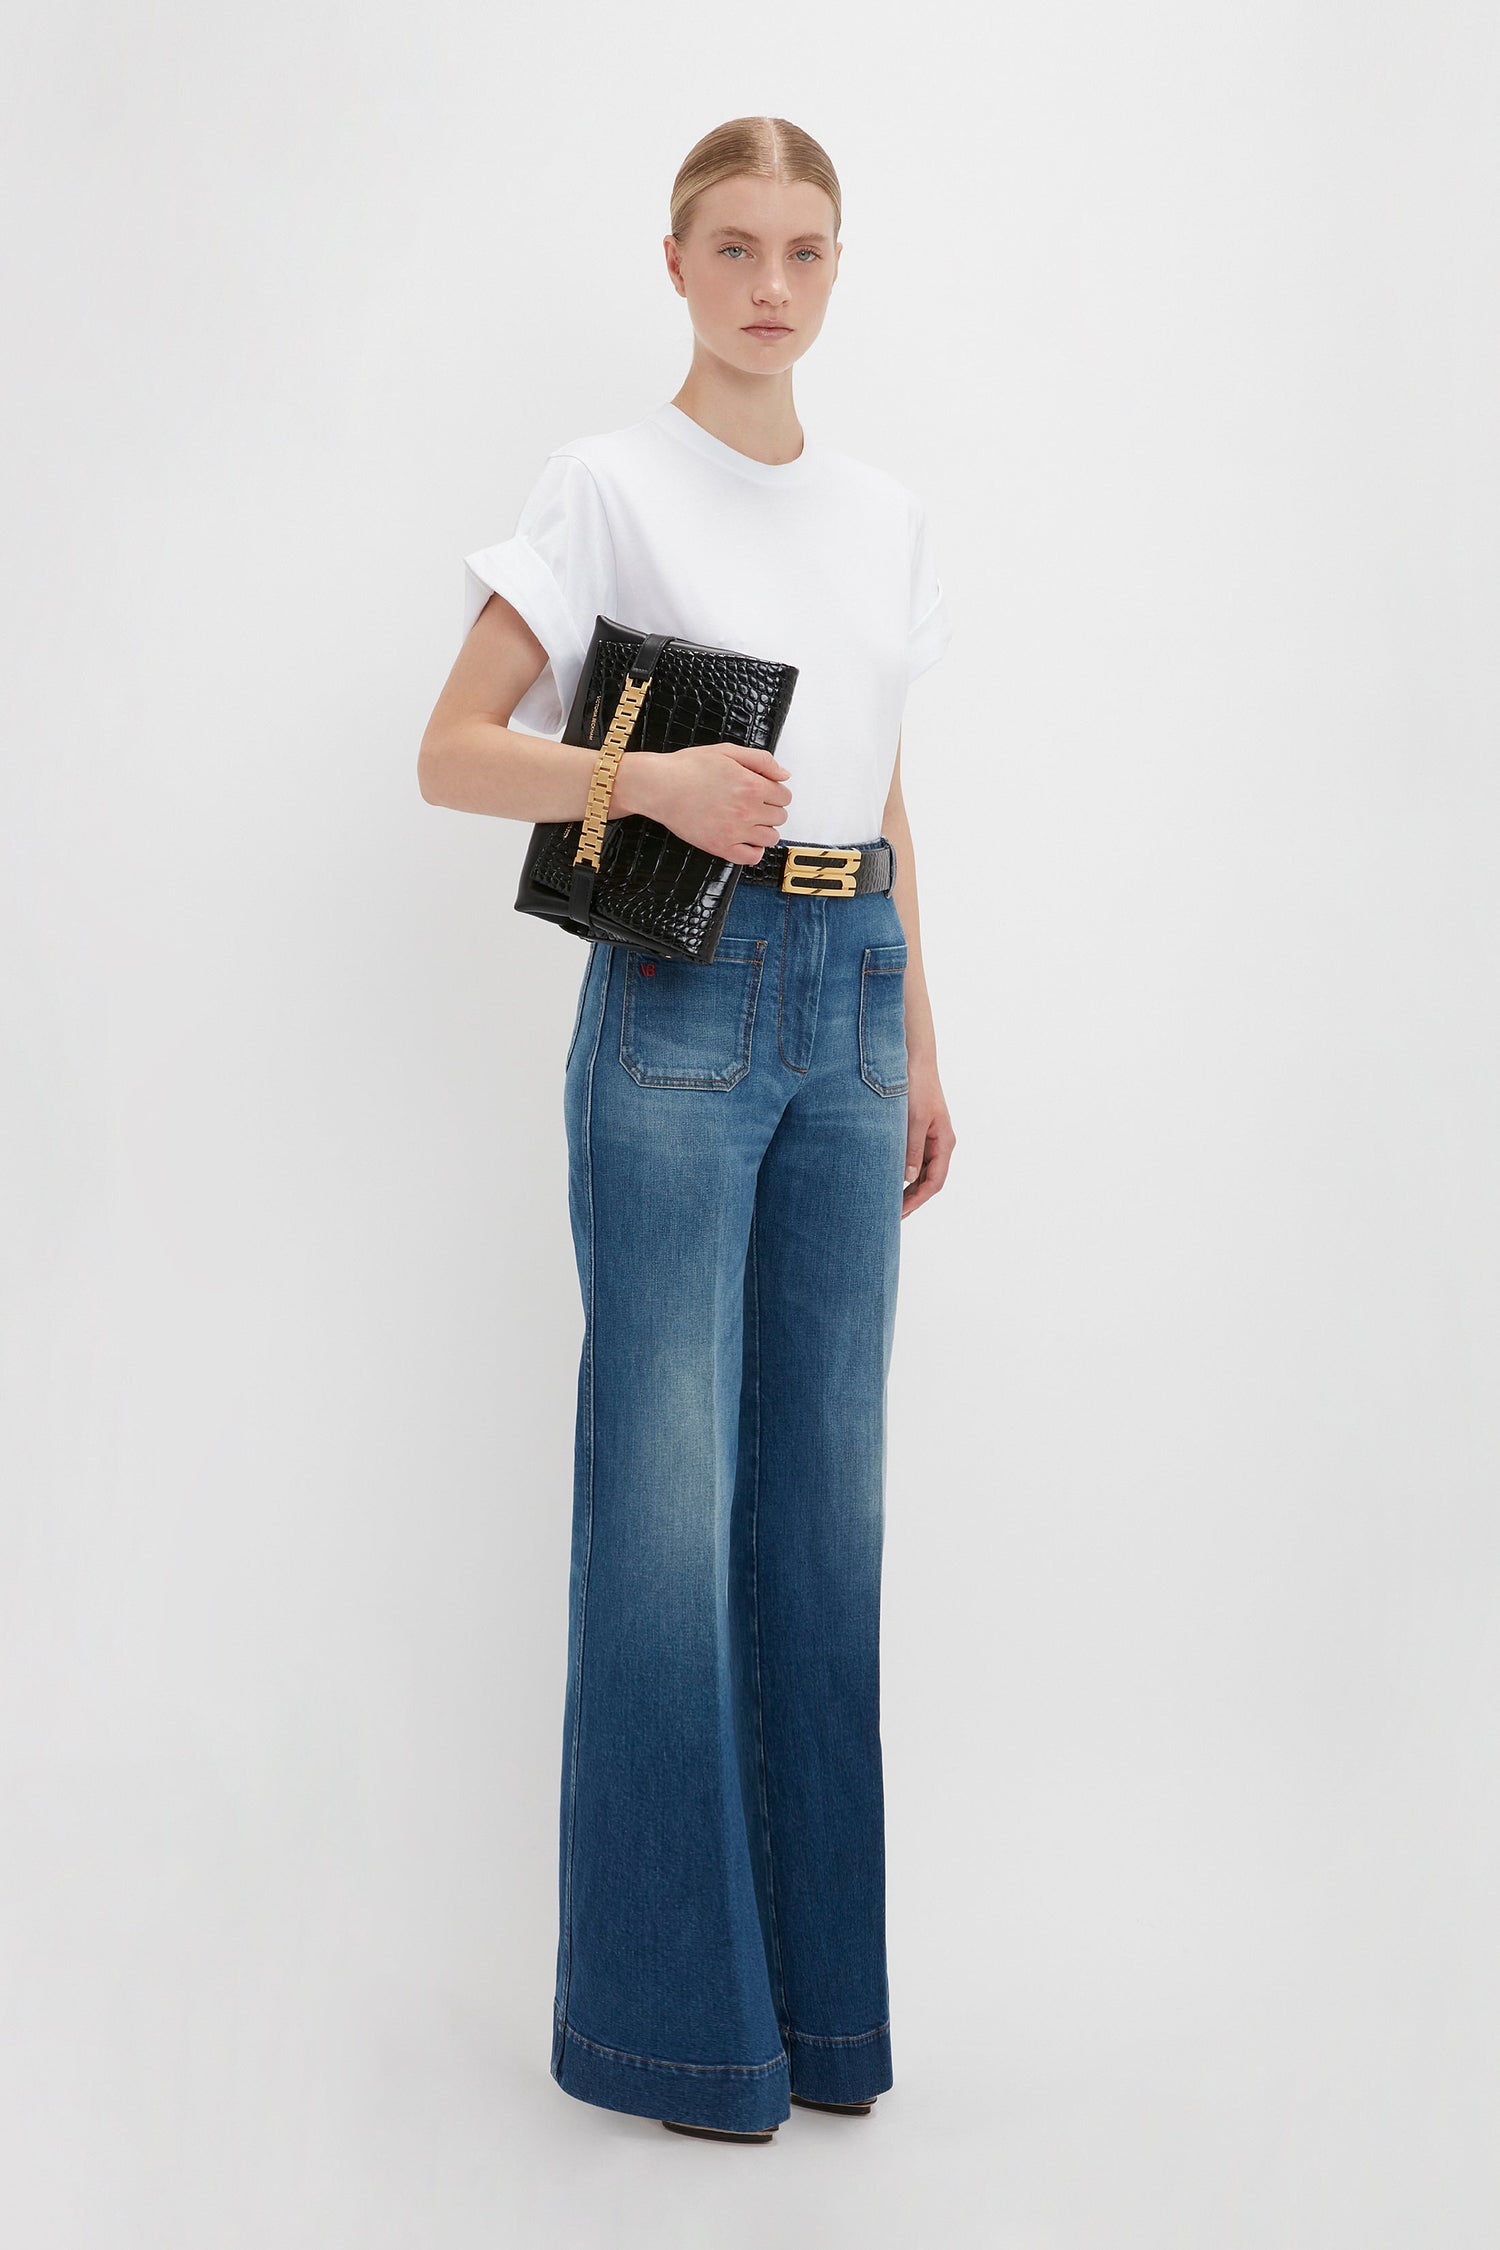 A woman in an oversized Victoria Beckham Asymmetric Relaxed Fit T-Shirt in white and blue jeans holding a black clutch and wearing a gold belt against a white background.